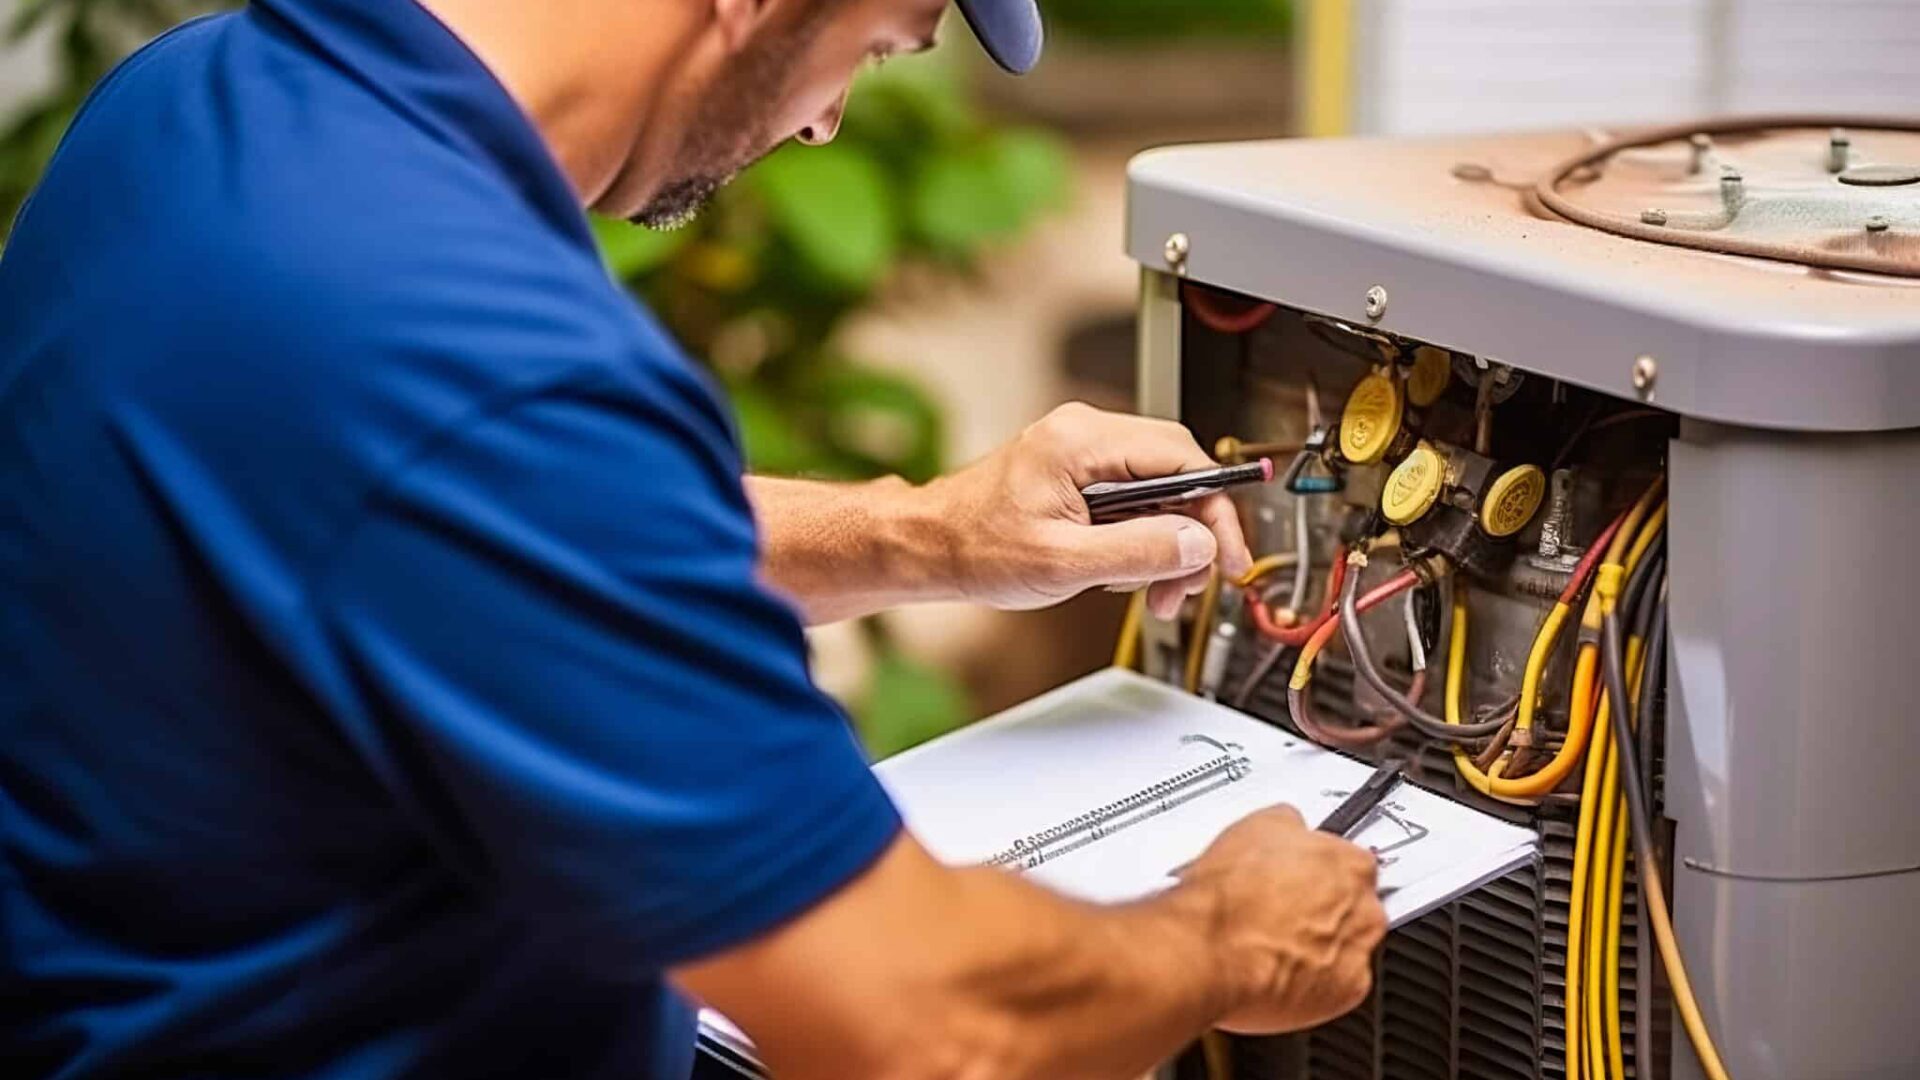 Efficient HVAC technician thoroughly inspecting a home air conditioning unit, holding clipboard in cool color indoor setting. Exudes professional technical ambiance.